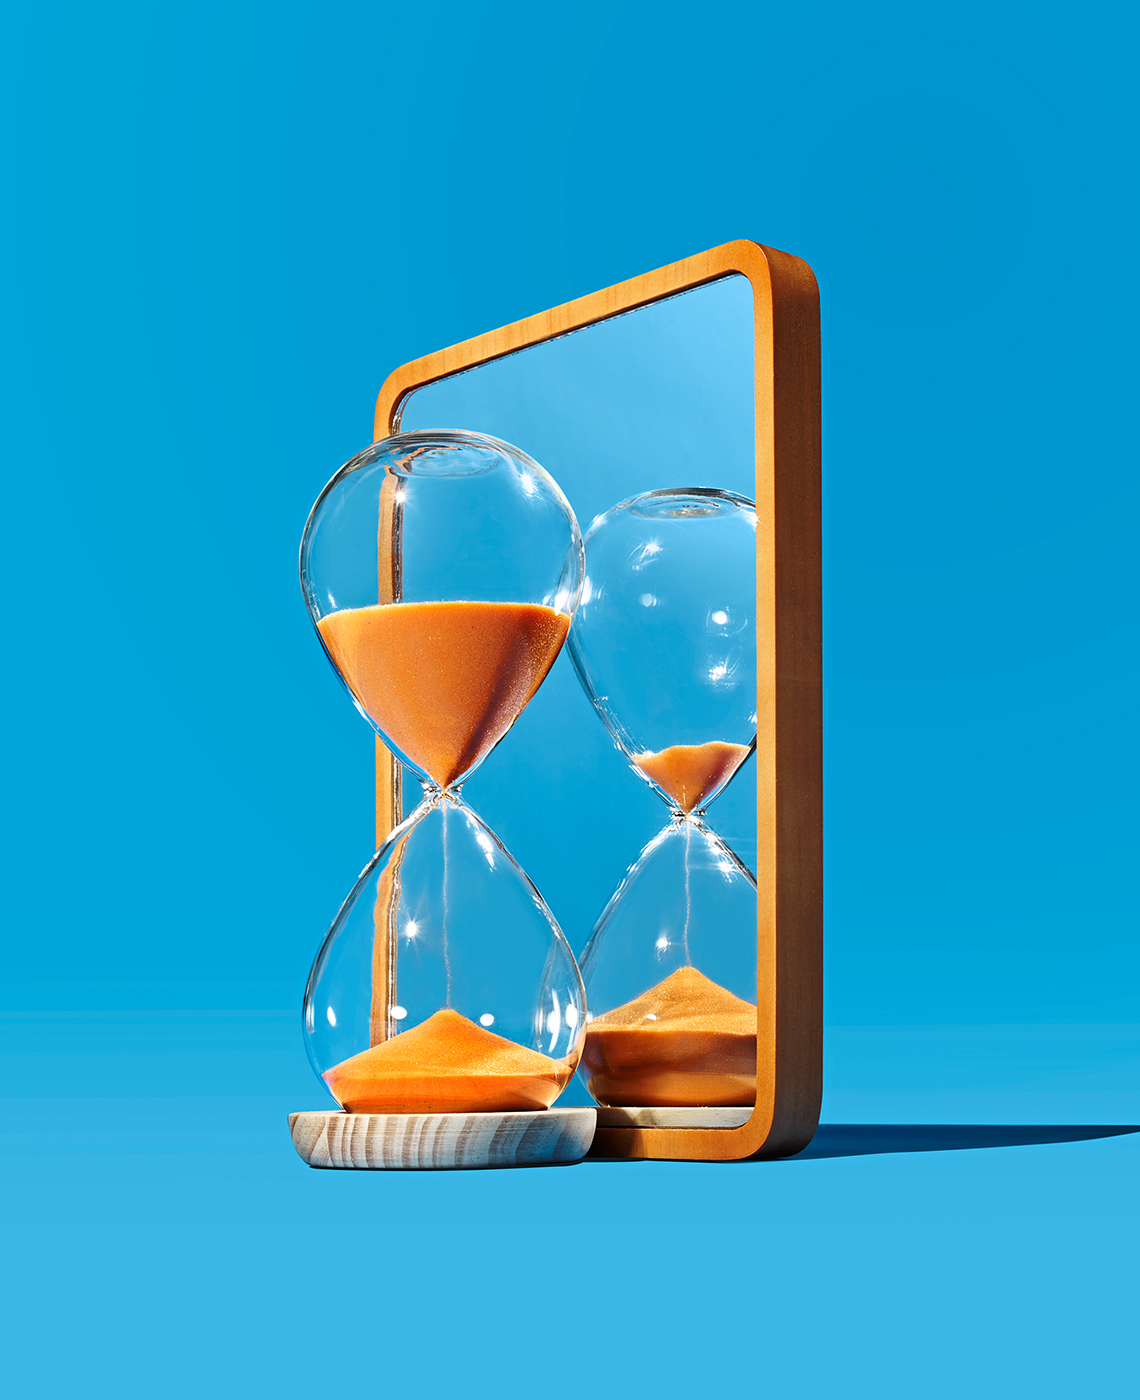 an hourglass reflected in a mirror but the reflection shows less time